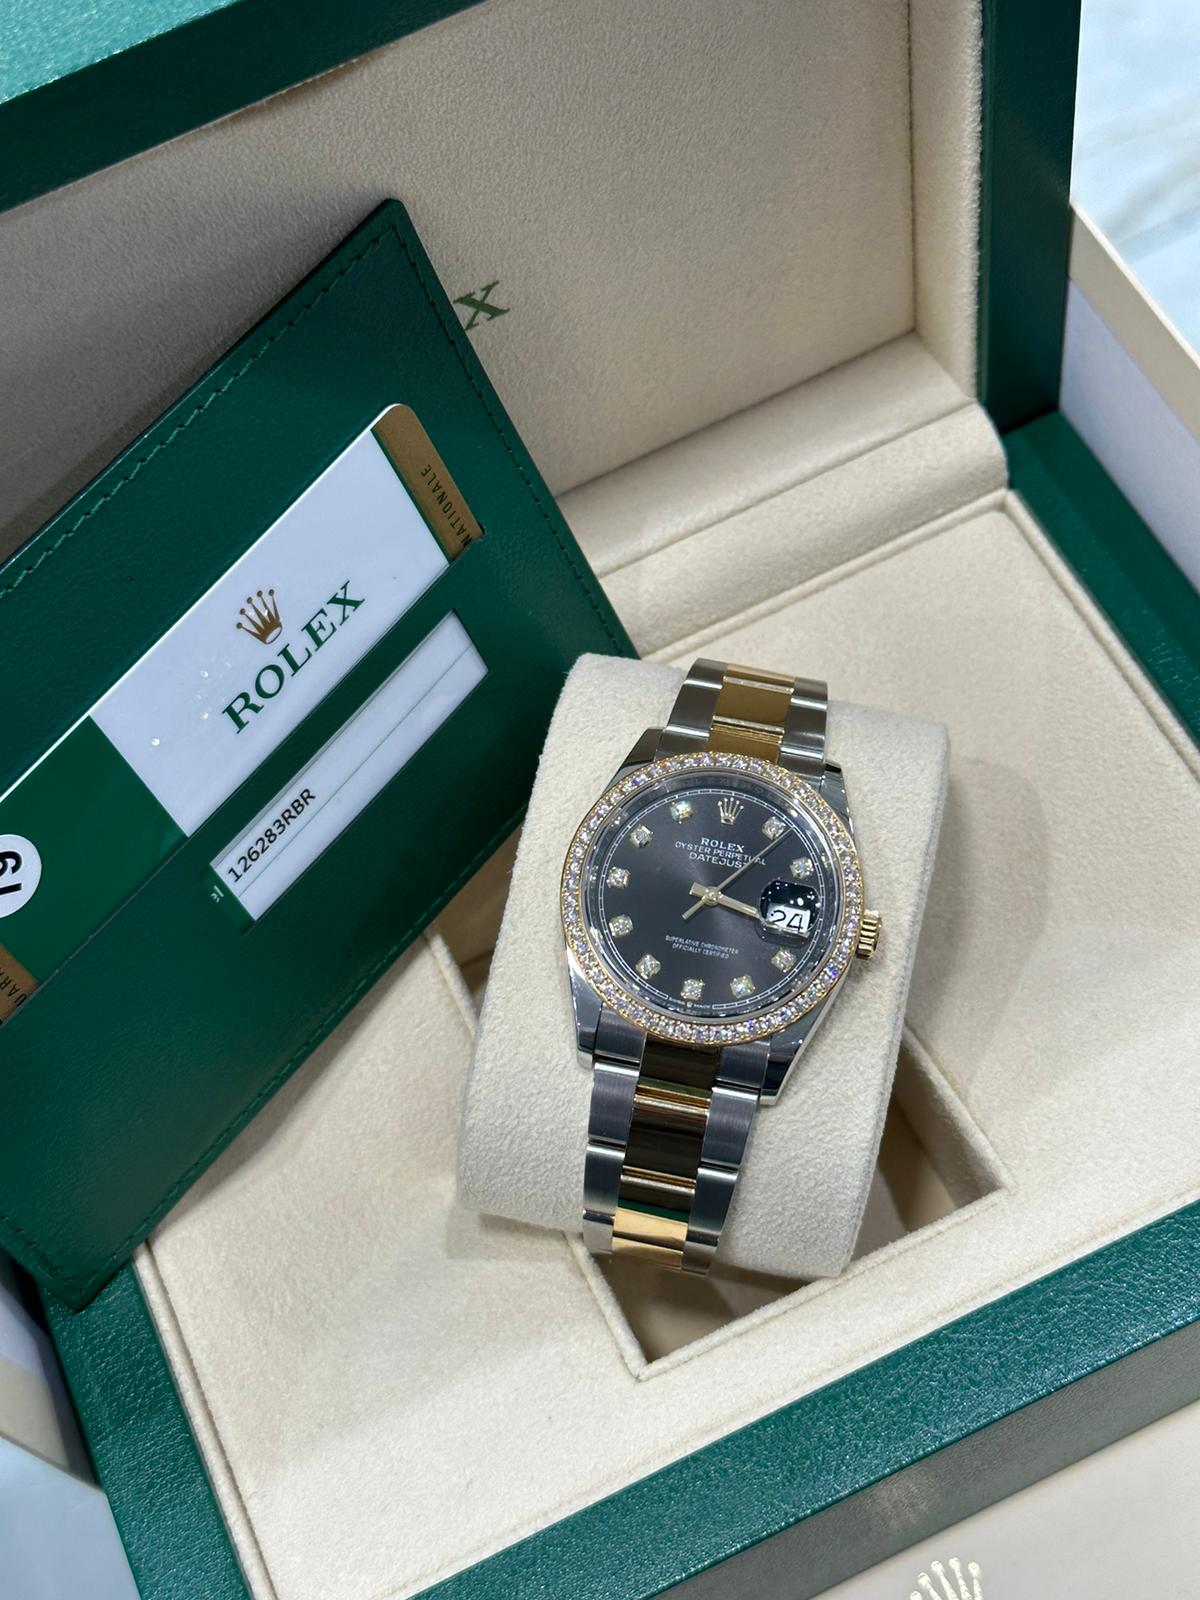 Rolex Datejust 36mm Steel&Yellow Gold with Factory diamond dial&bezel126283RBR 2019 with box/papers - Image 8 of 8